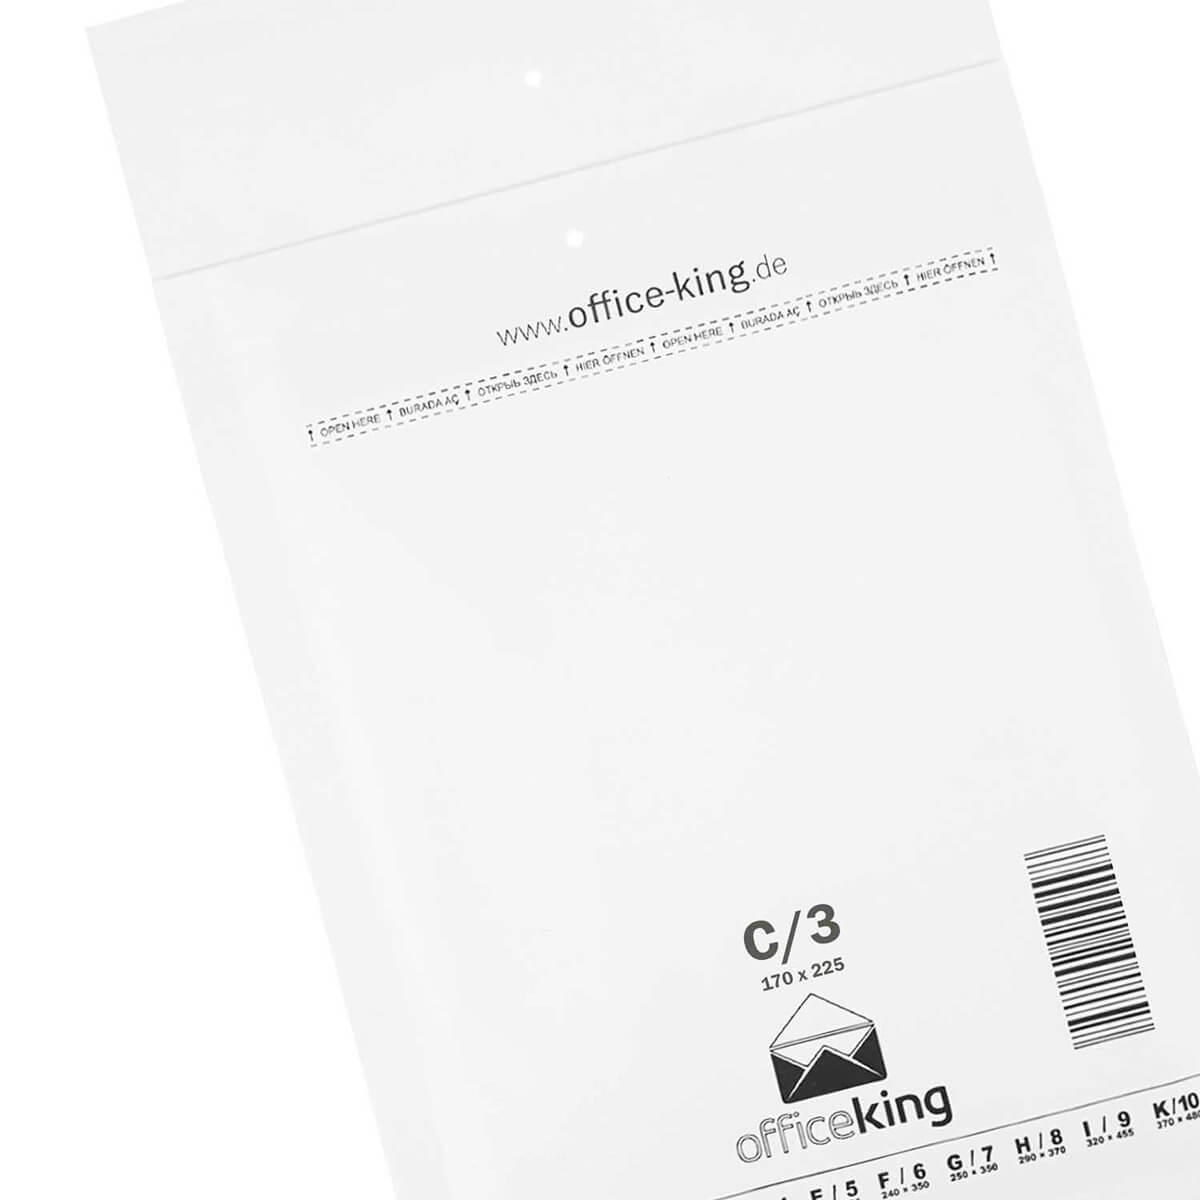 10x C3 Bubble mailers white 170 x 225 mm - officeking